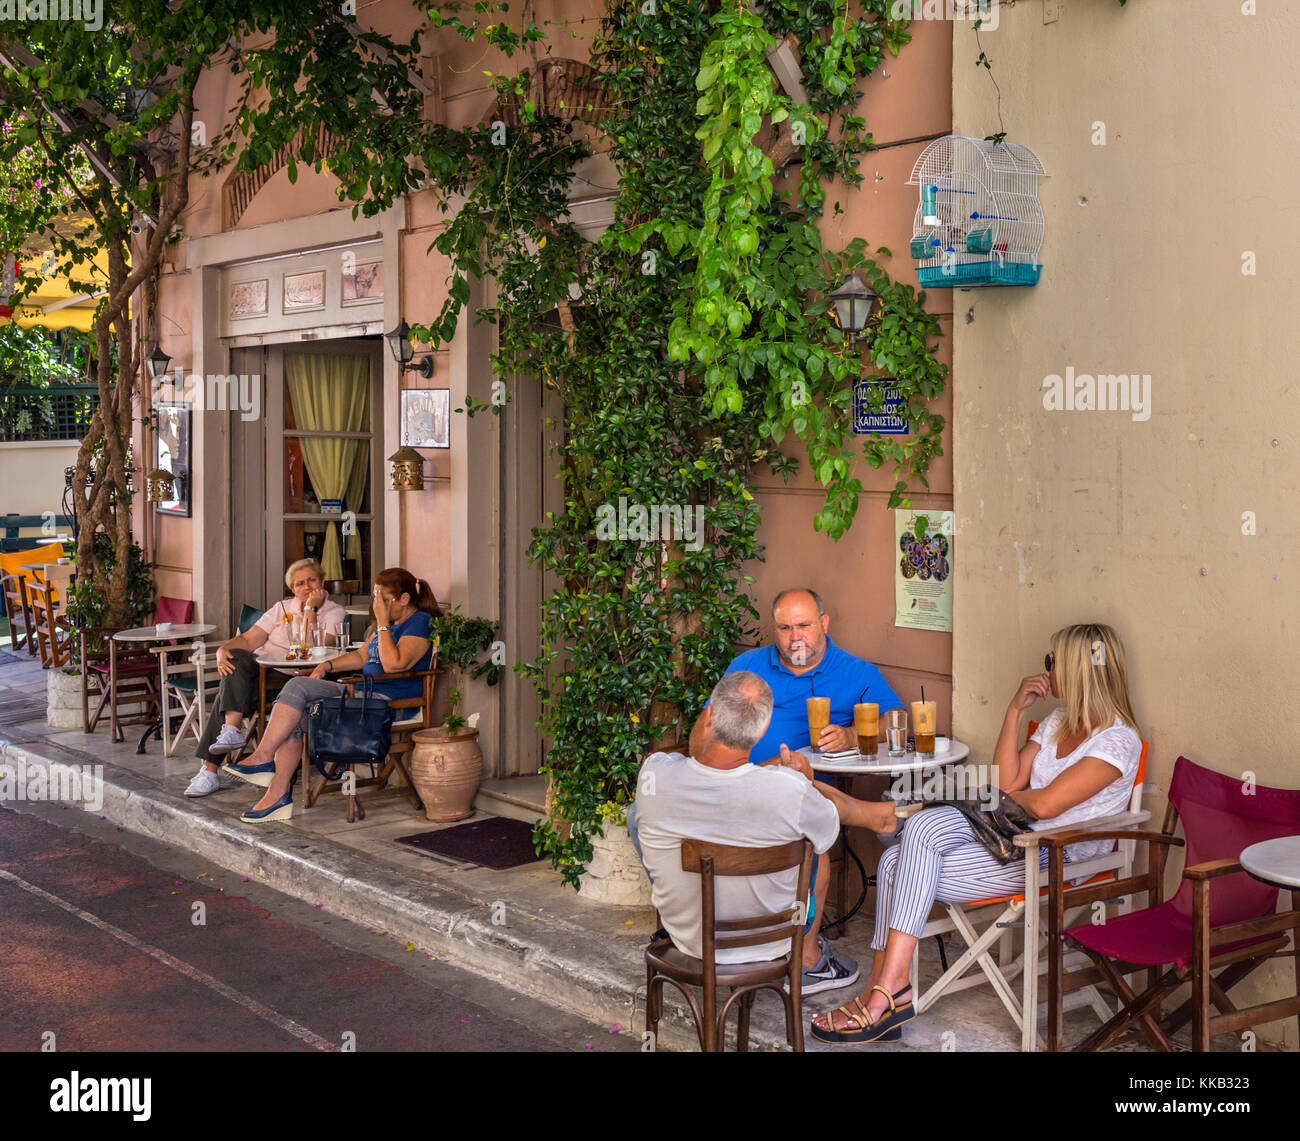 Cafe on Lisiou Street in the Plaka district, Athens, Greece Stock Photo